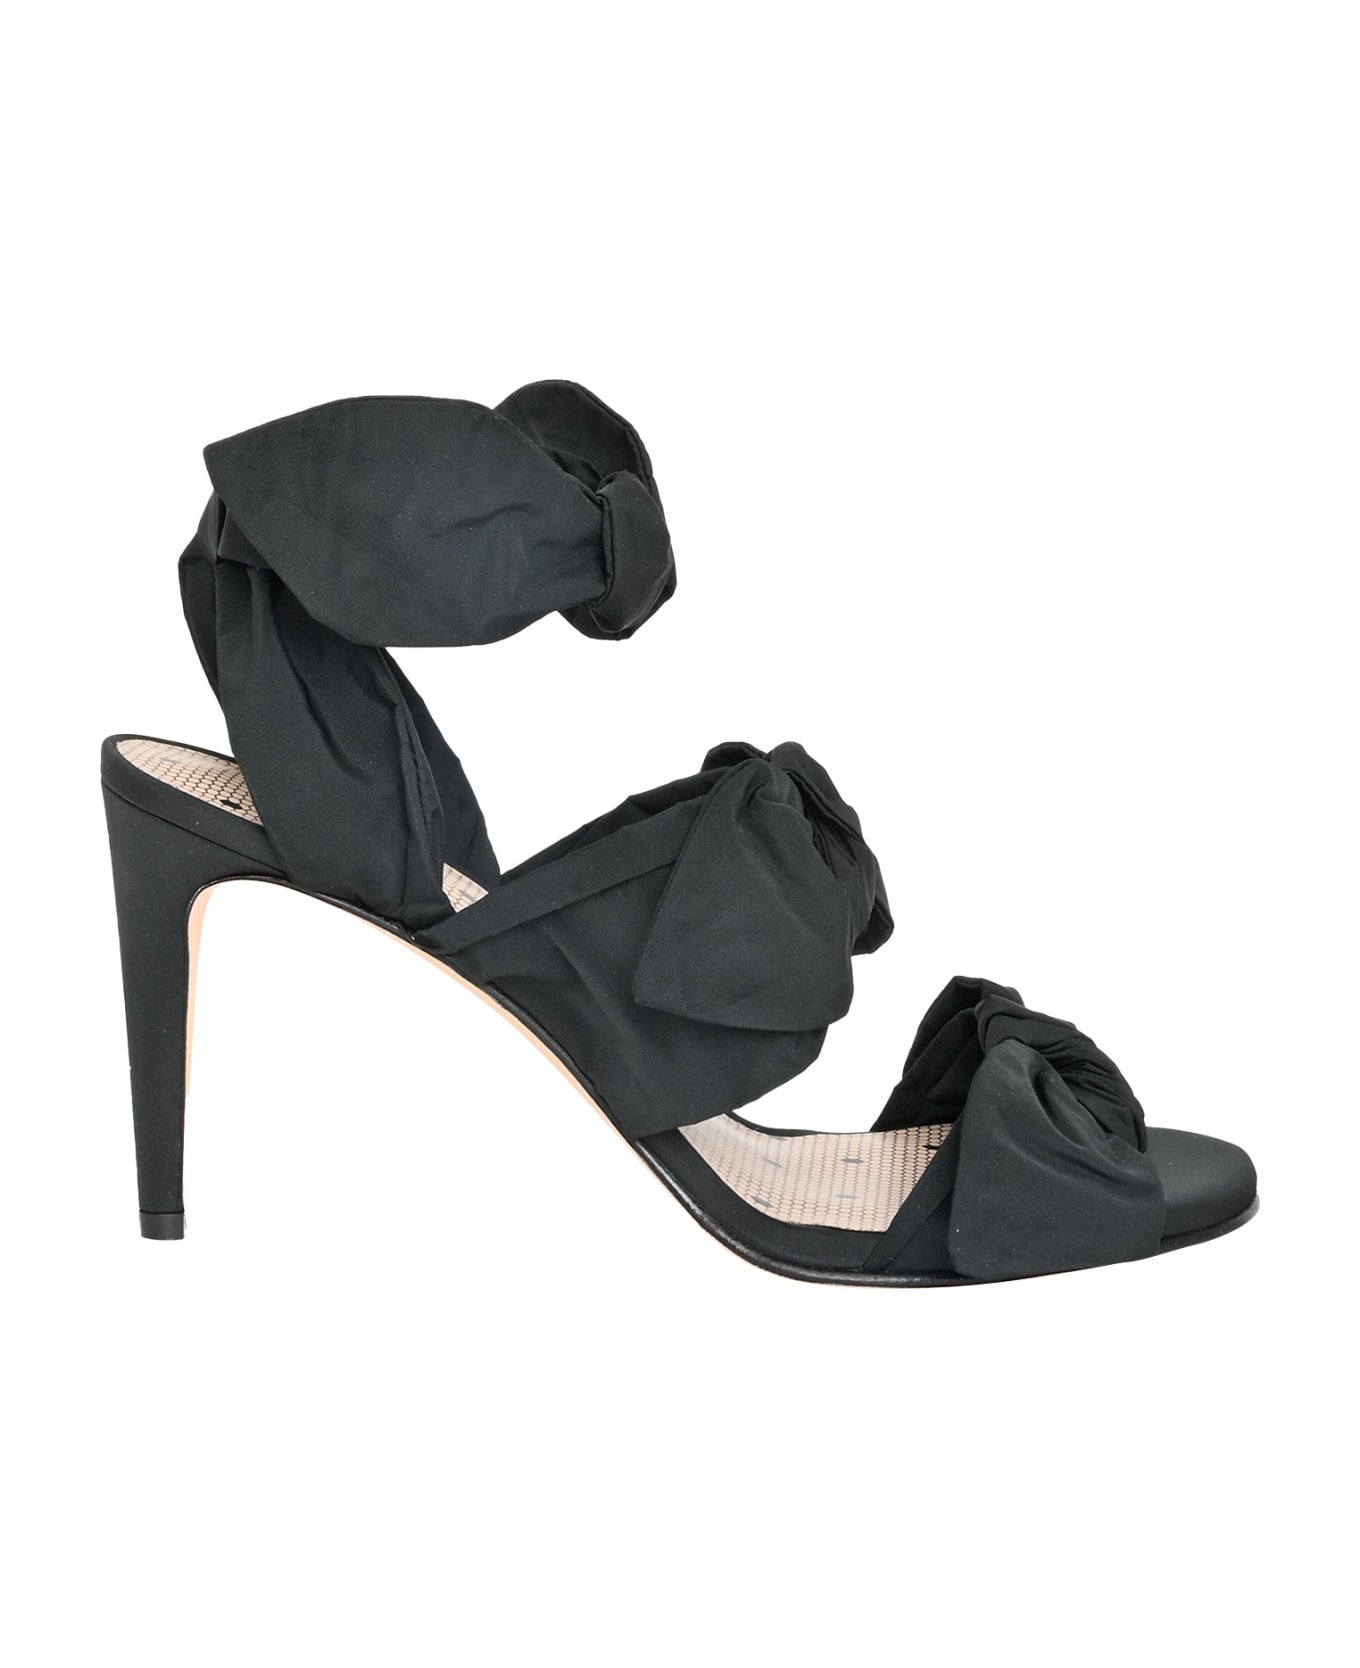 RED Valentino Bow Sandals - BLACK